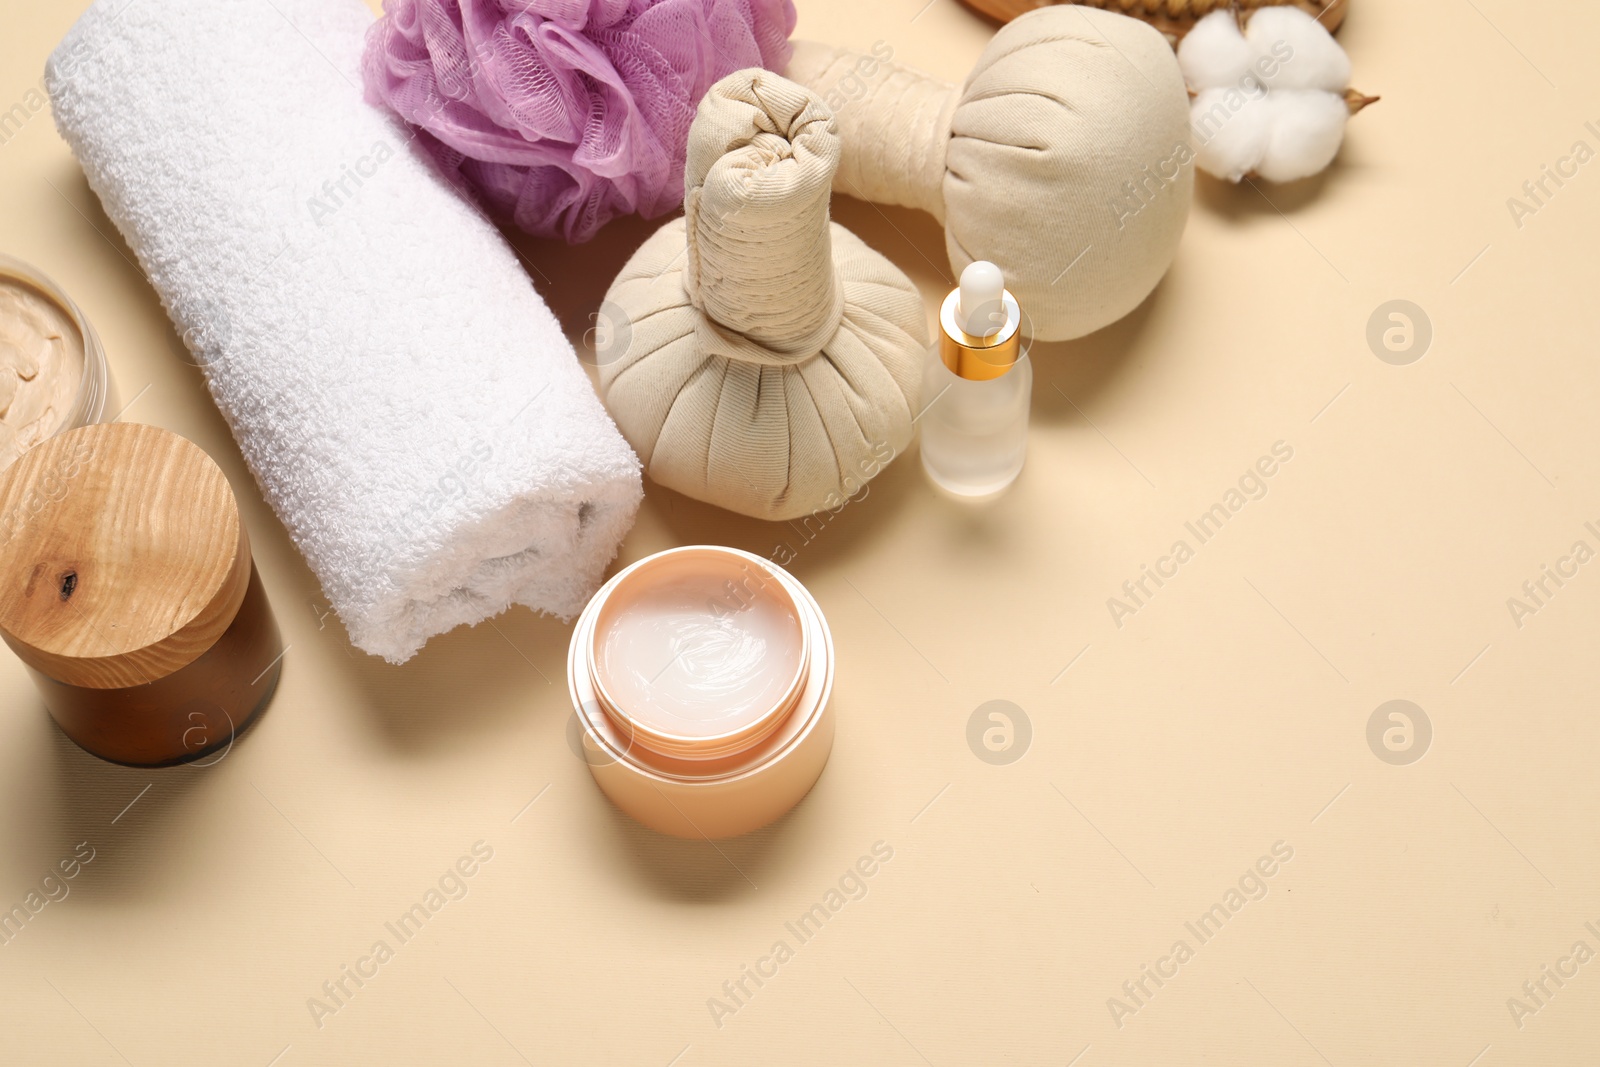 Photo of Bath accessories. Personal care products on beige background, above view. Space for text